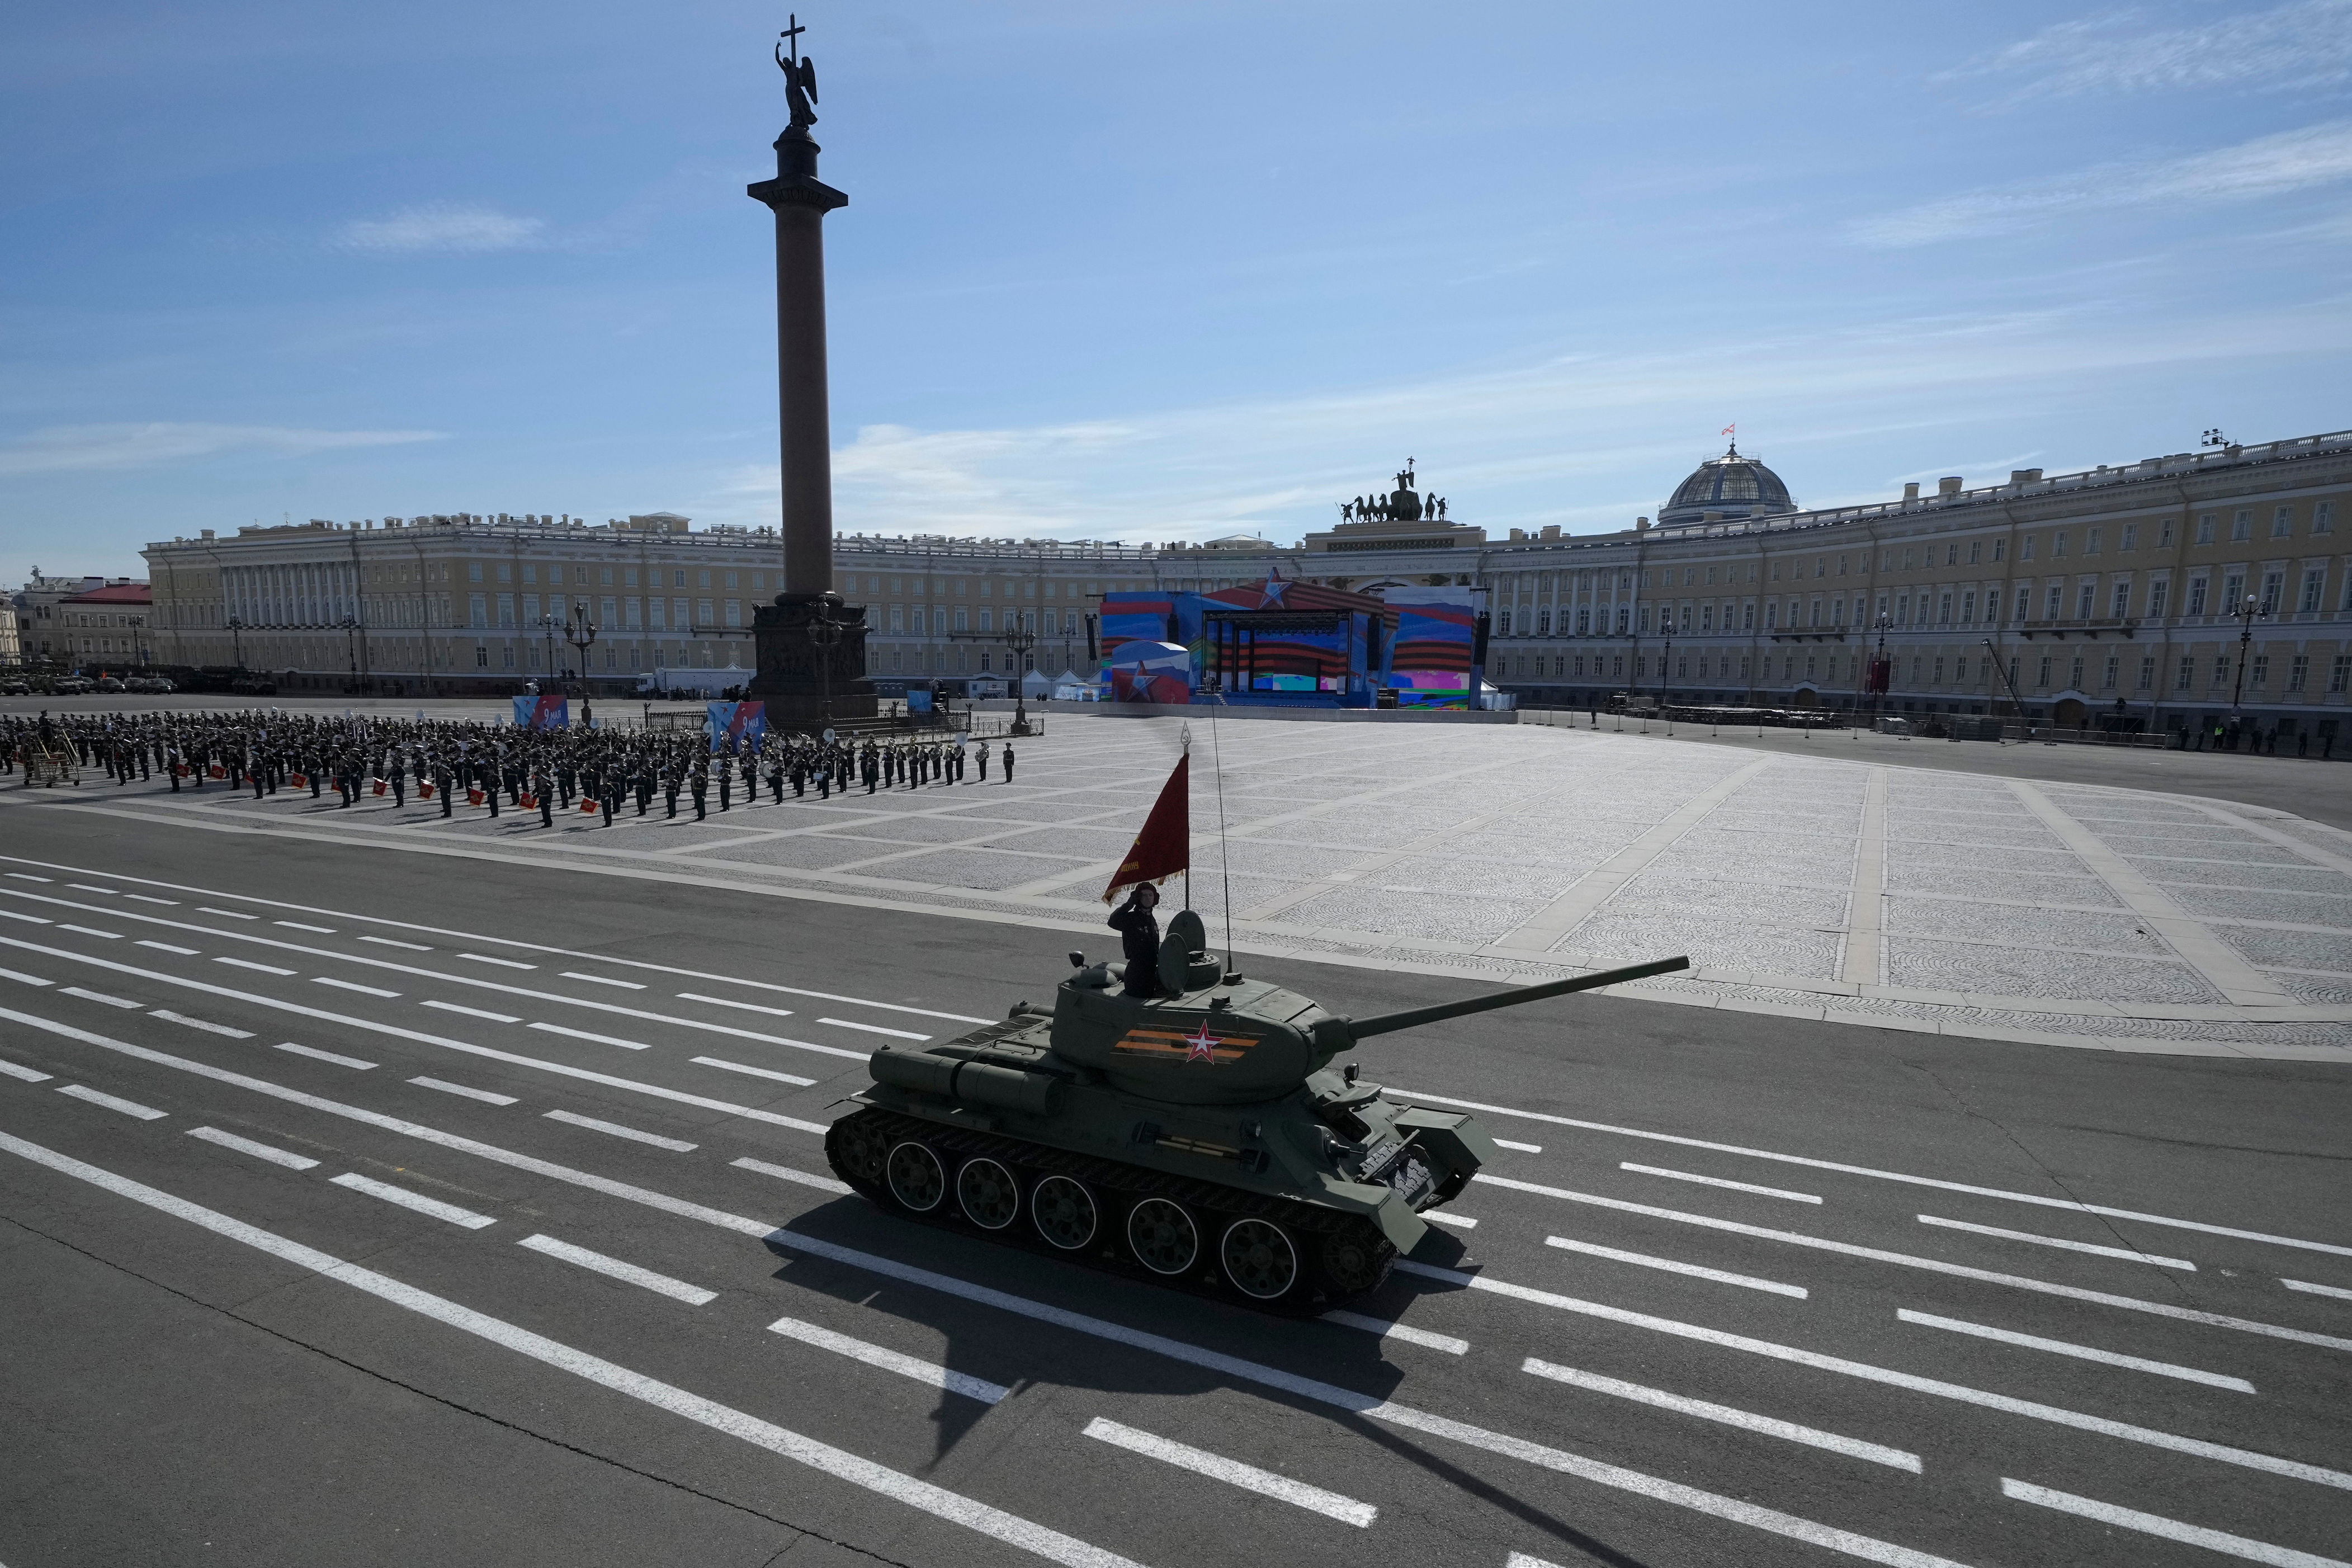 putin marks russia’s victory day parade with single tank for second year running